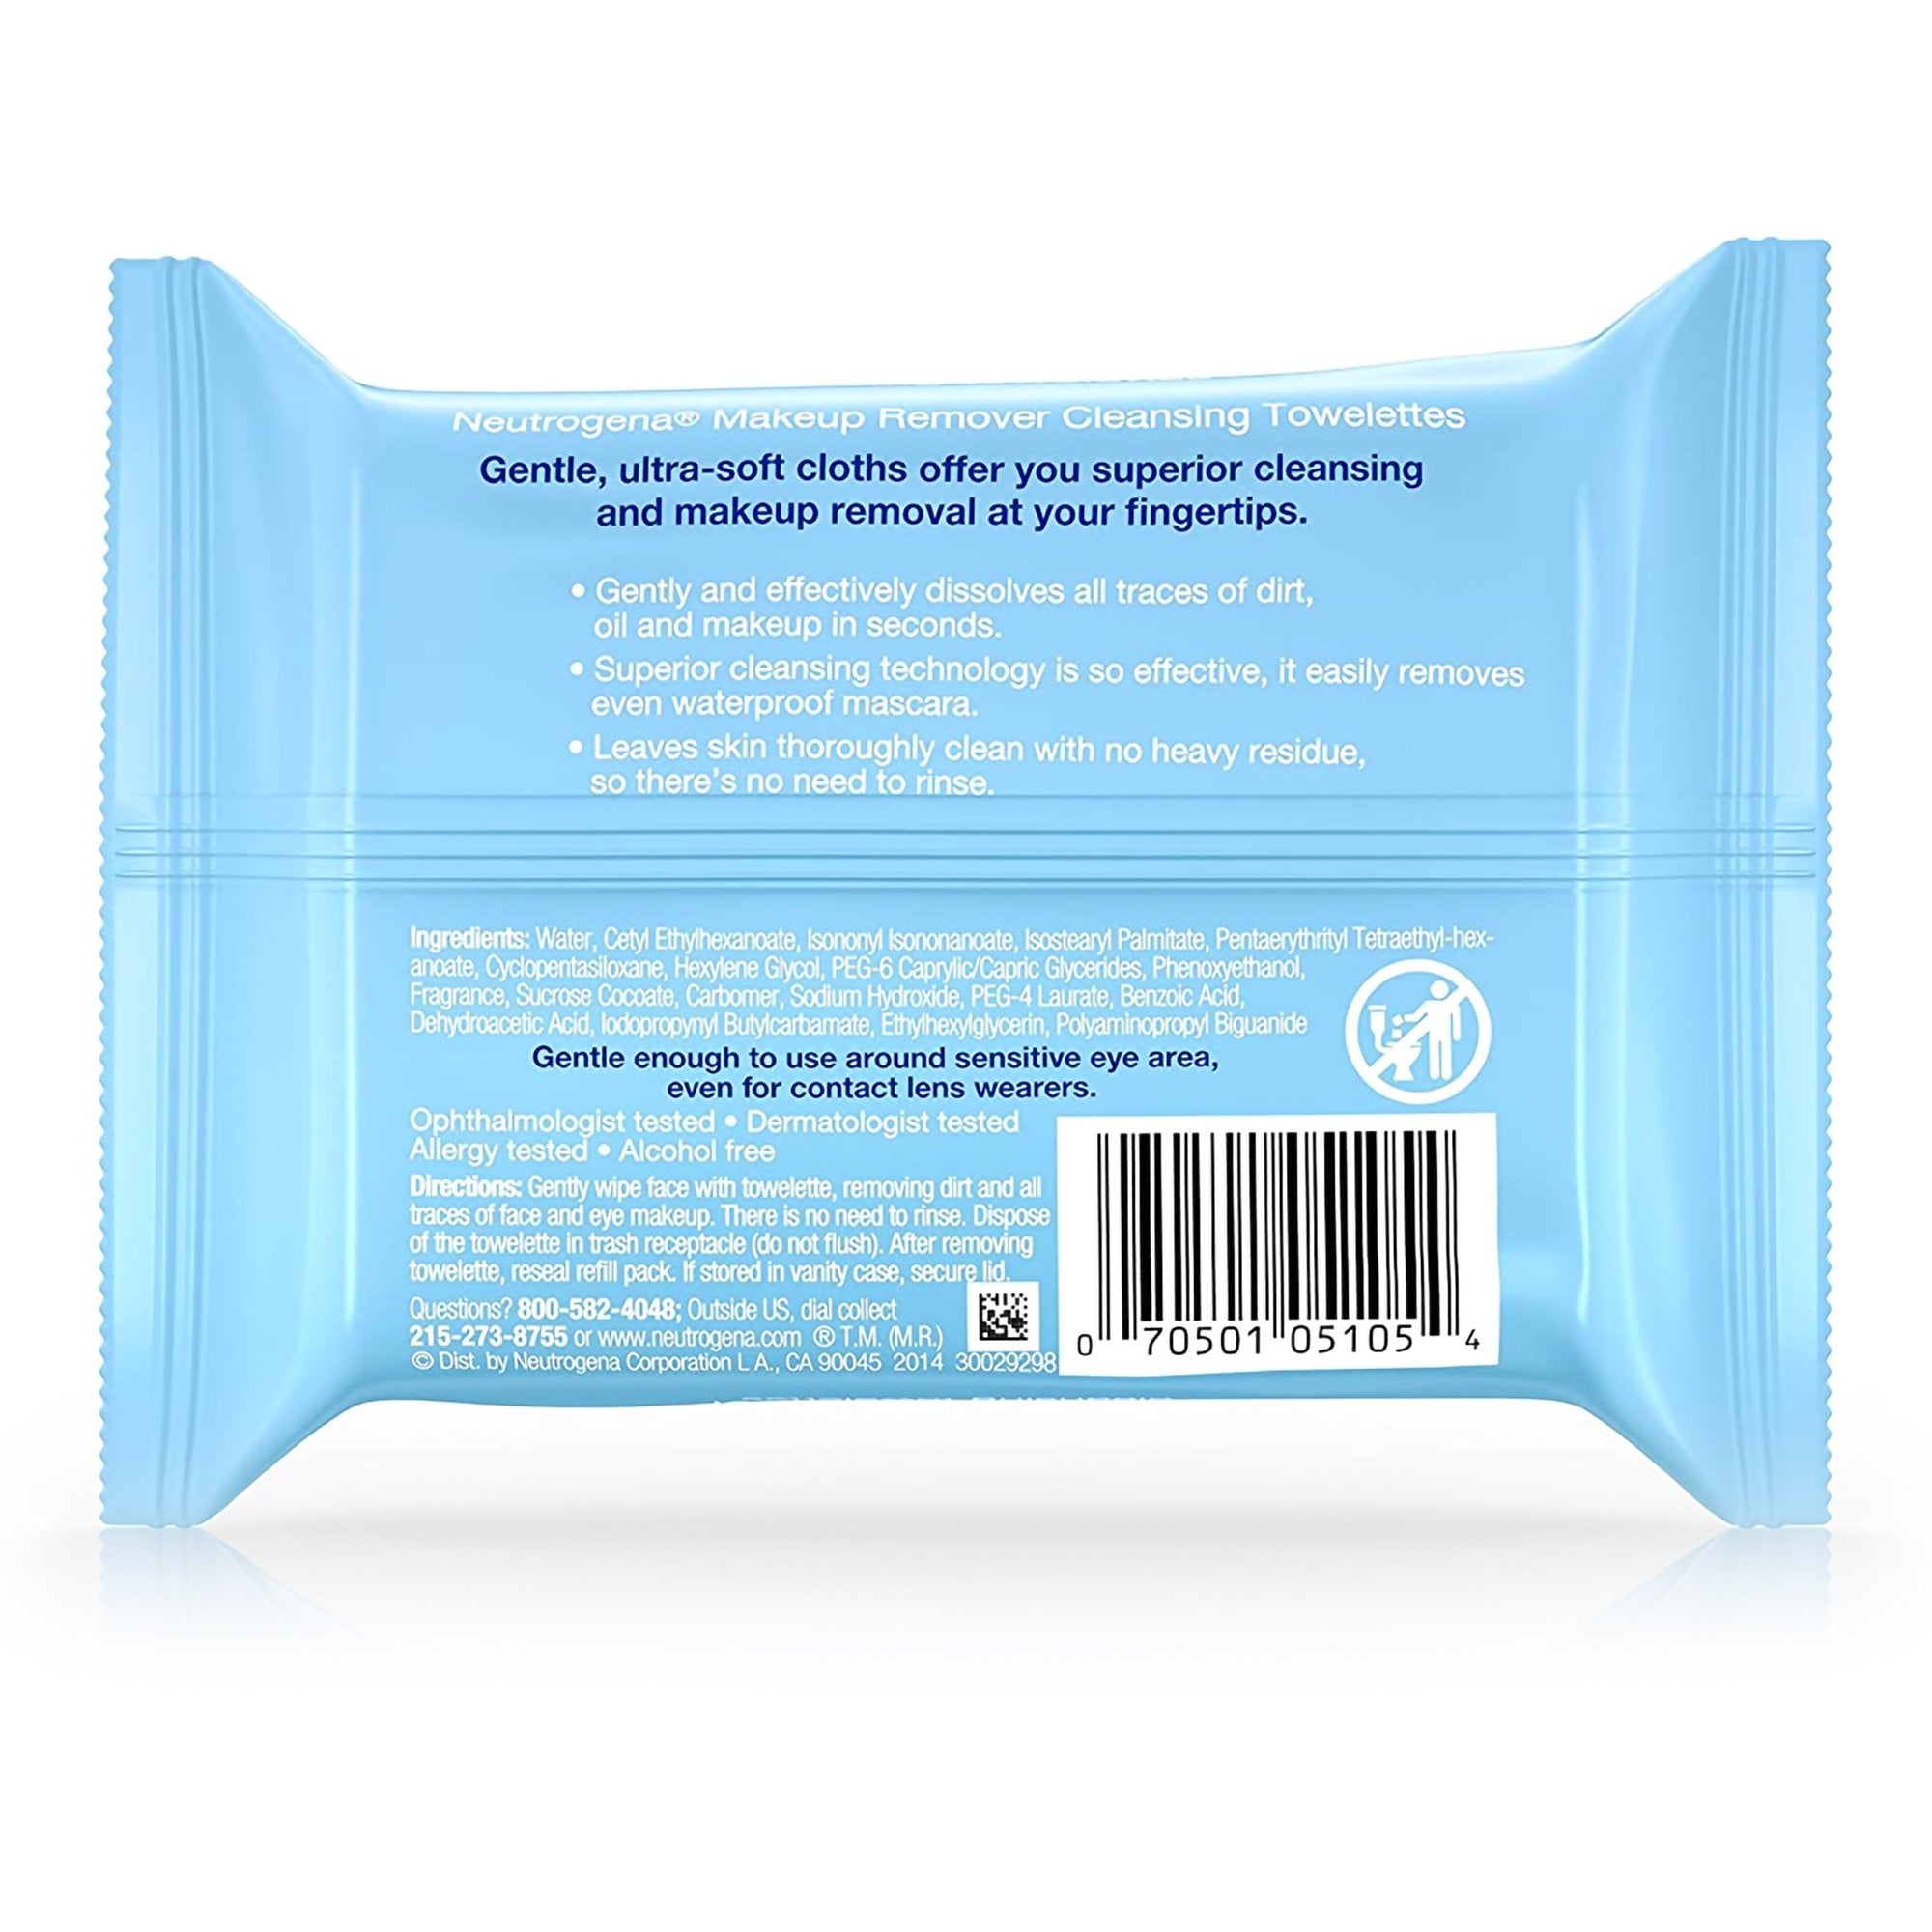 Makeup Remover Neutrogena Wipe 25 per Pack Soft Pack Scented